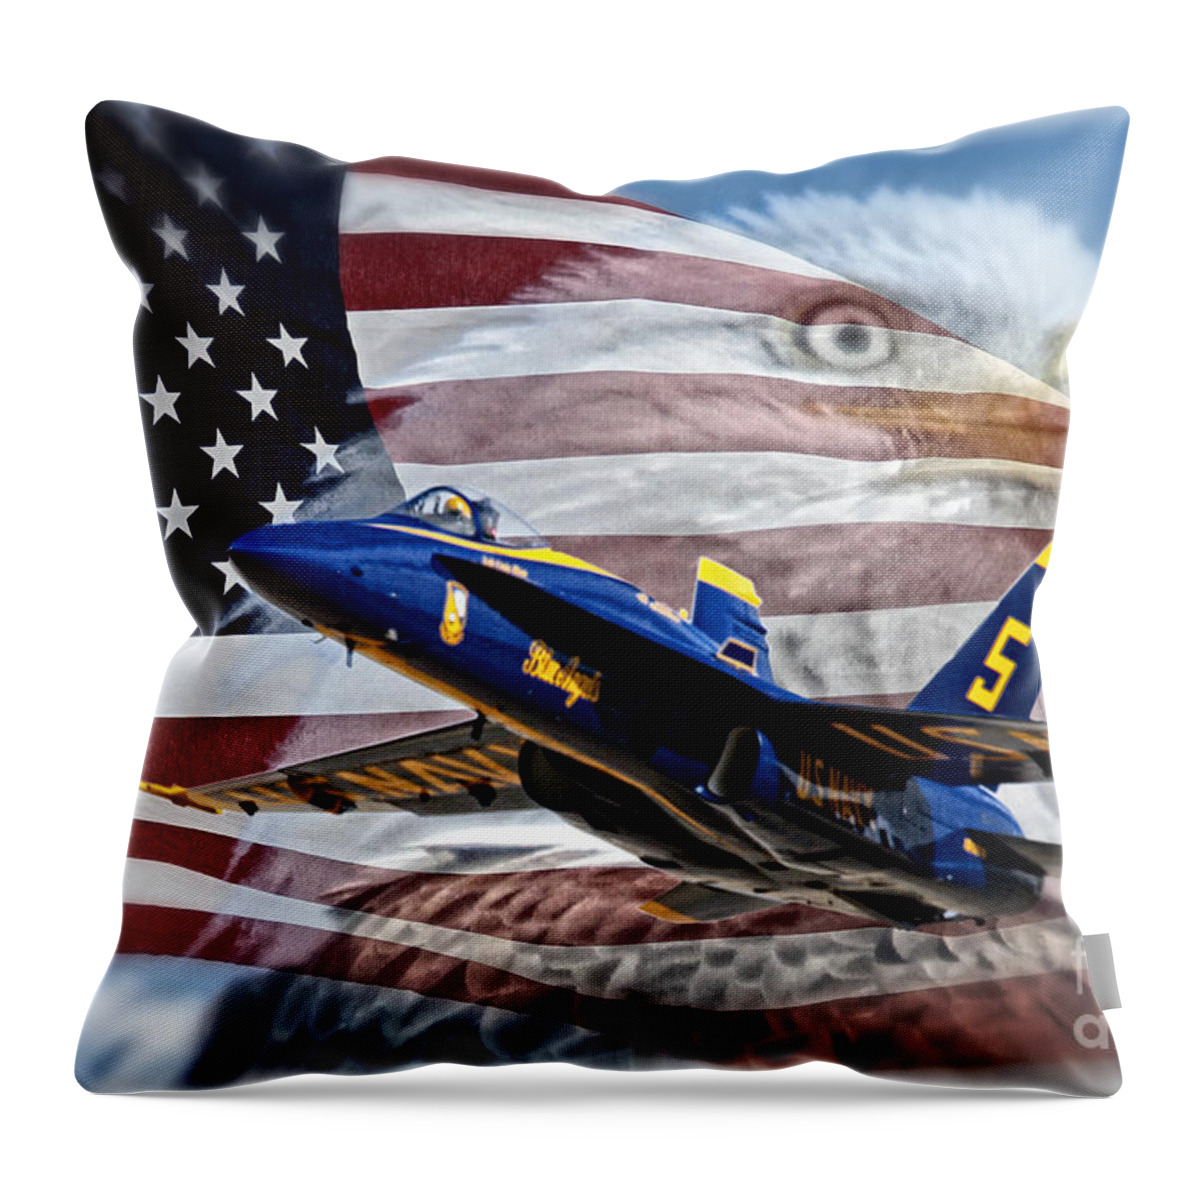 American Flag Throw Pillow featuring the photograph Symbols by Bob Hislop